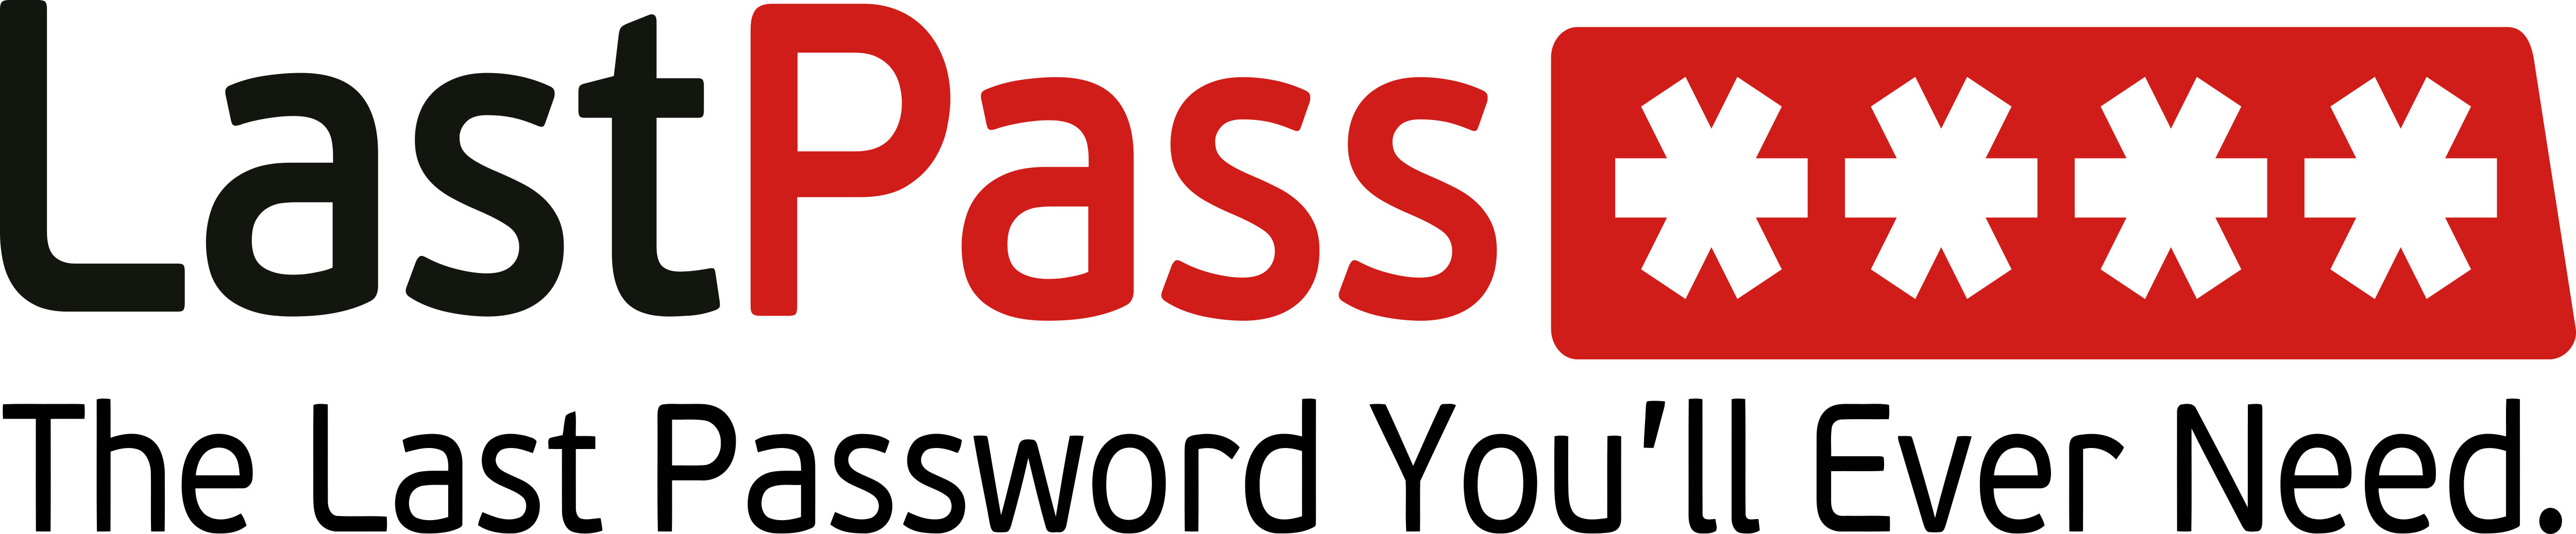 lastpass yearly cost